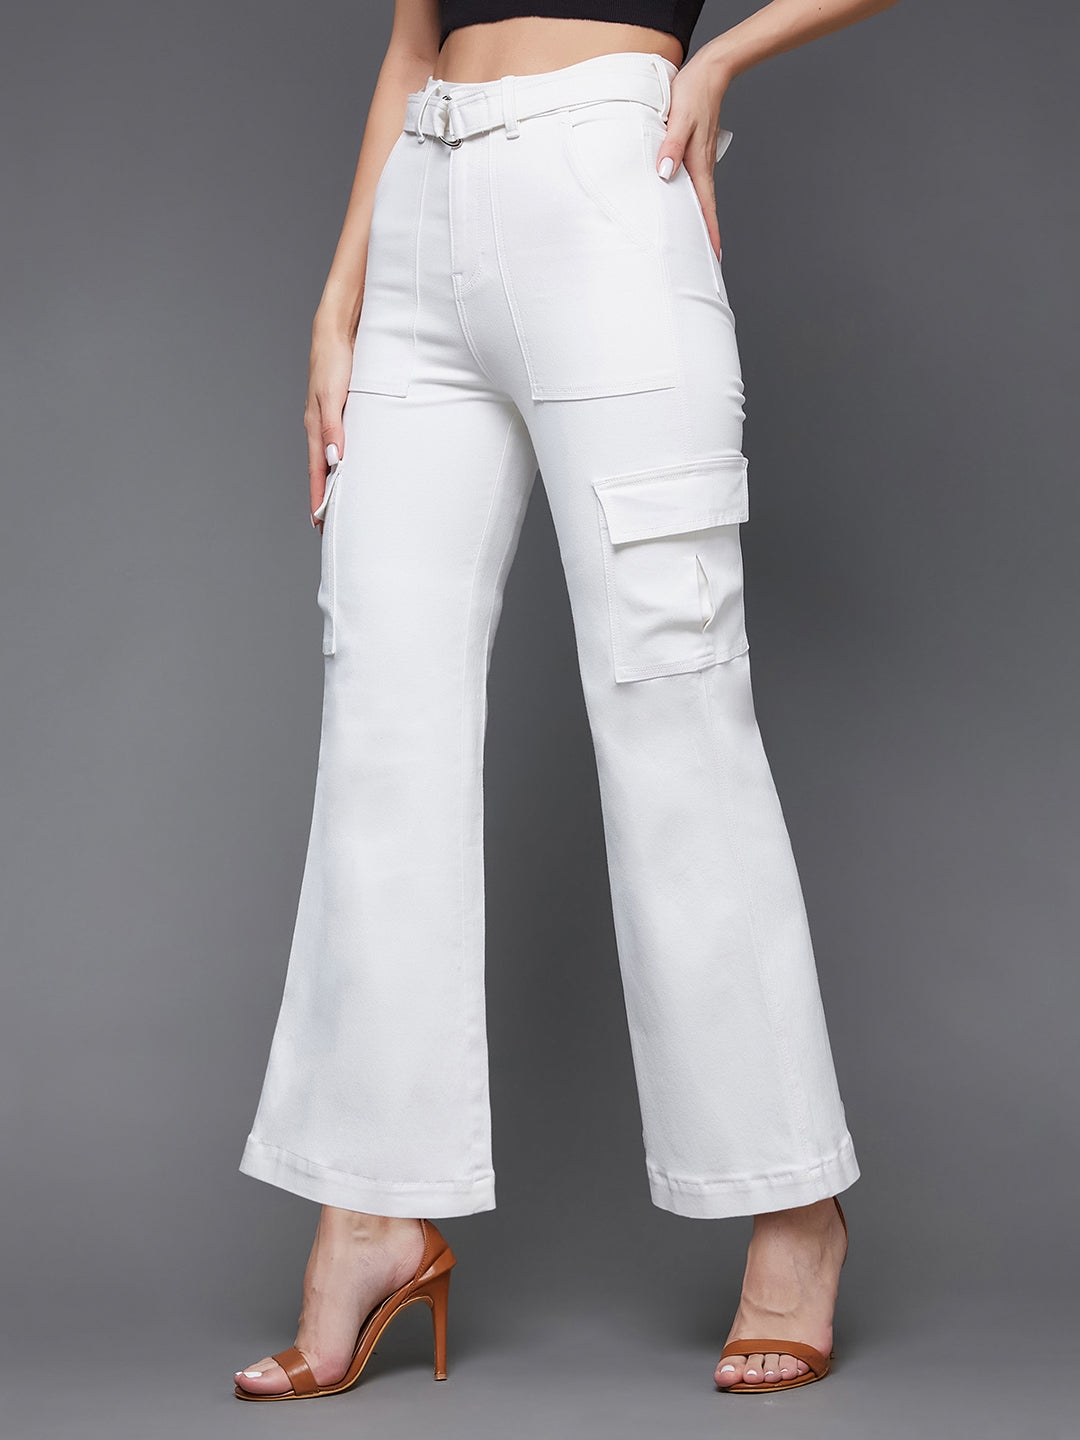 White Wide Leg High Rise Clean Look Regular Stretchable Denim Jeans